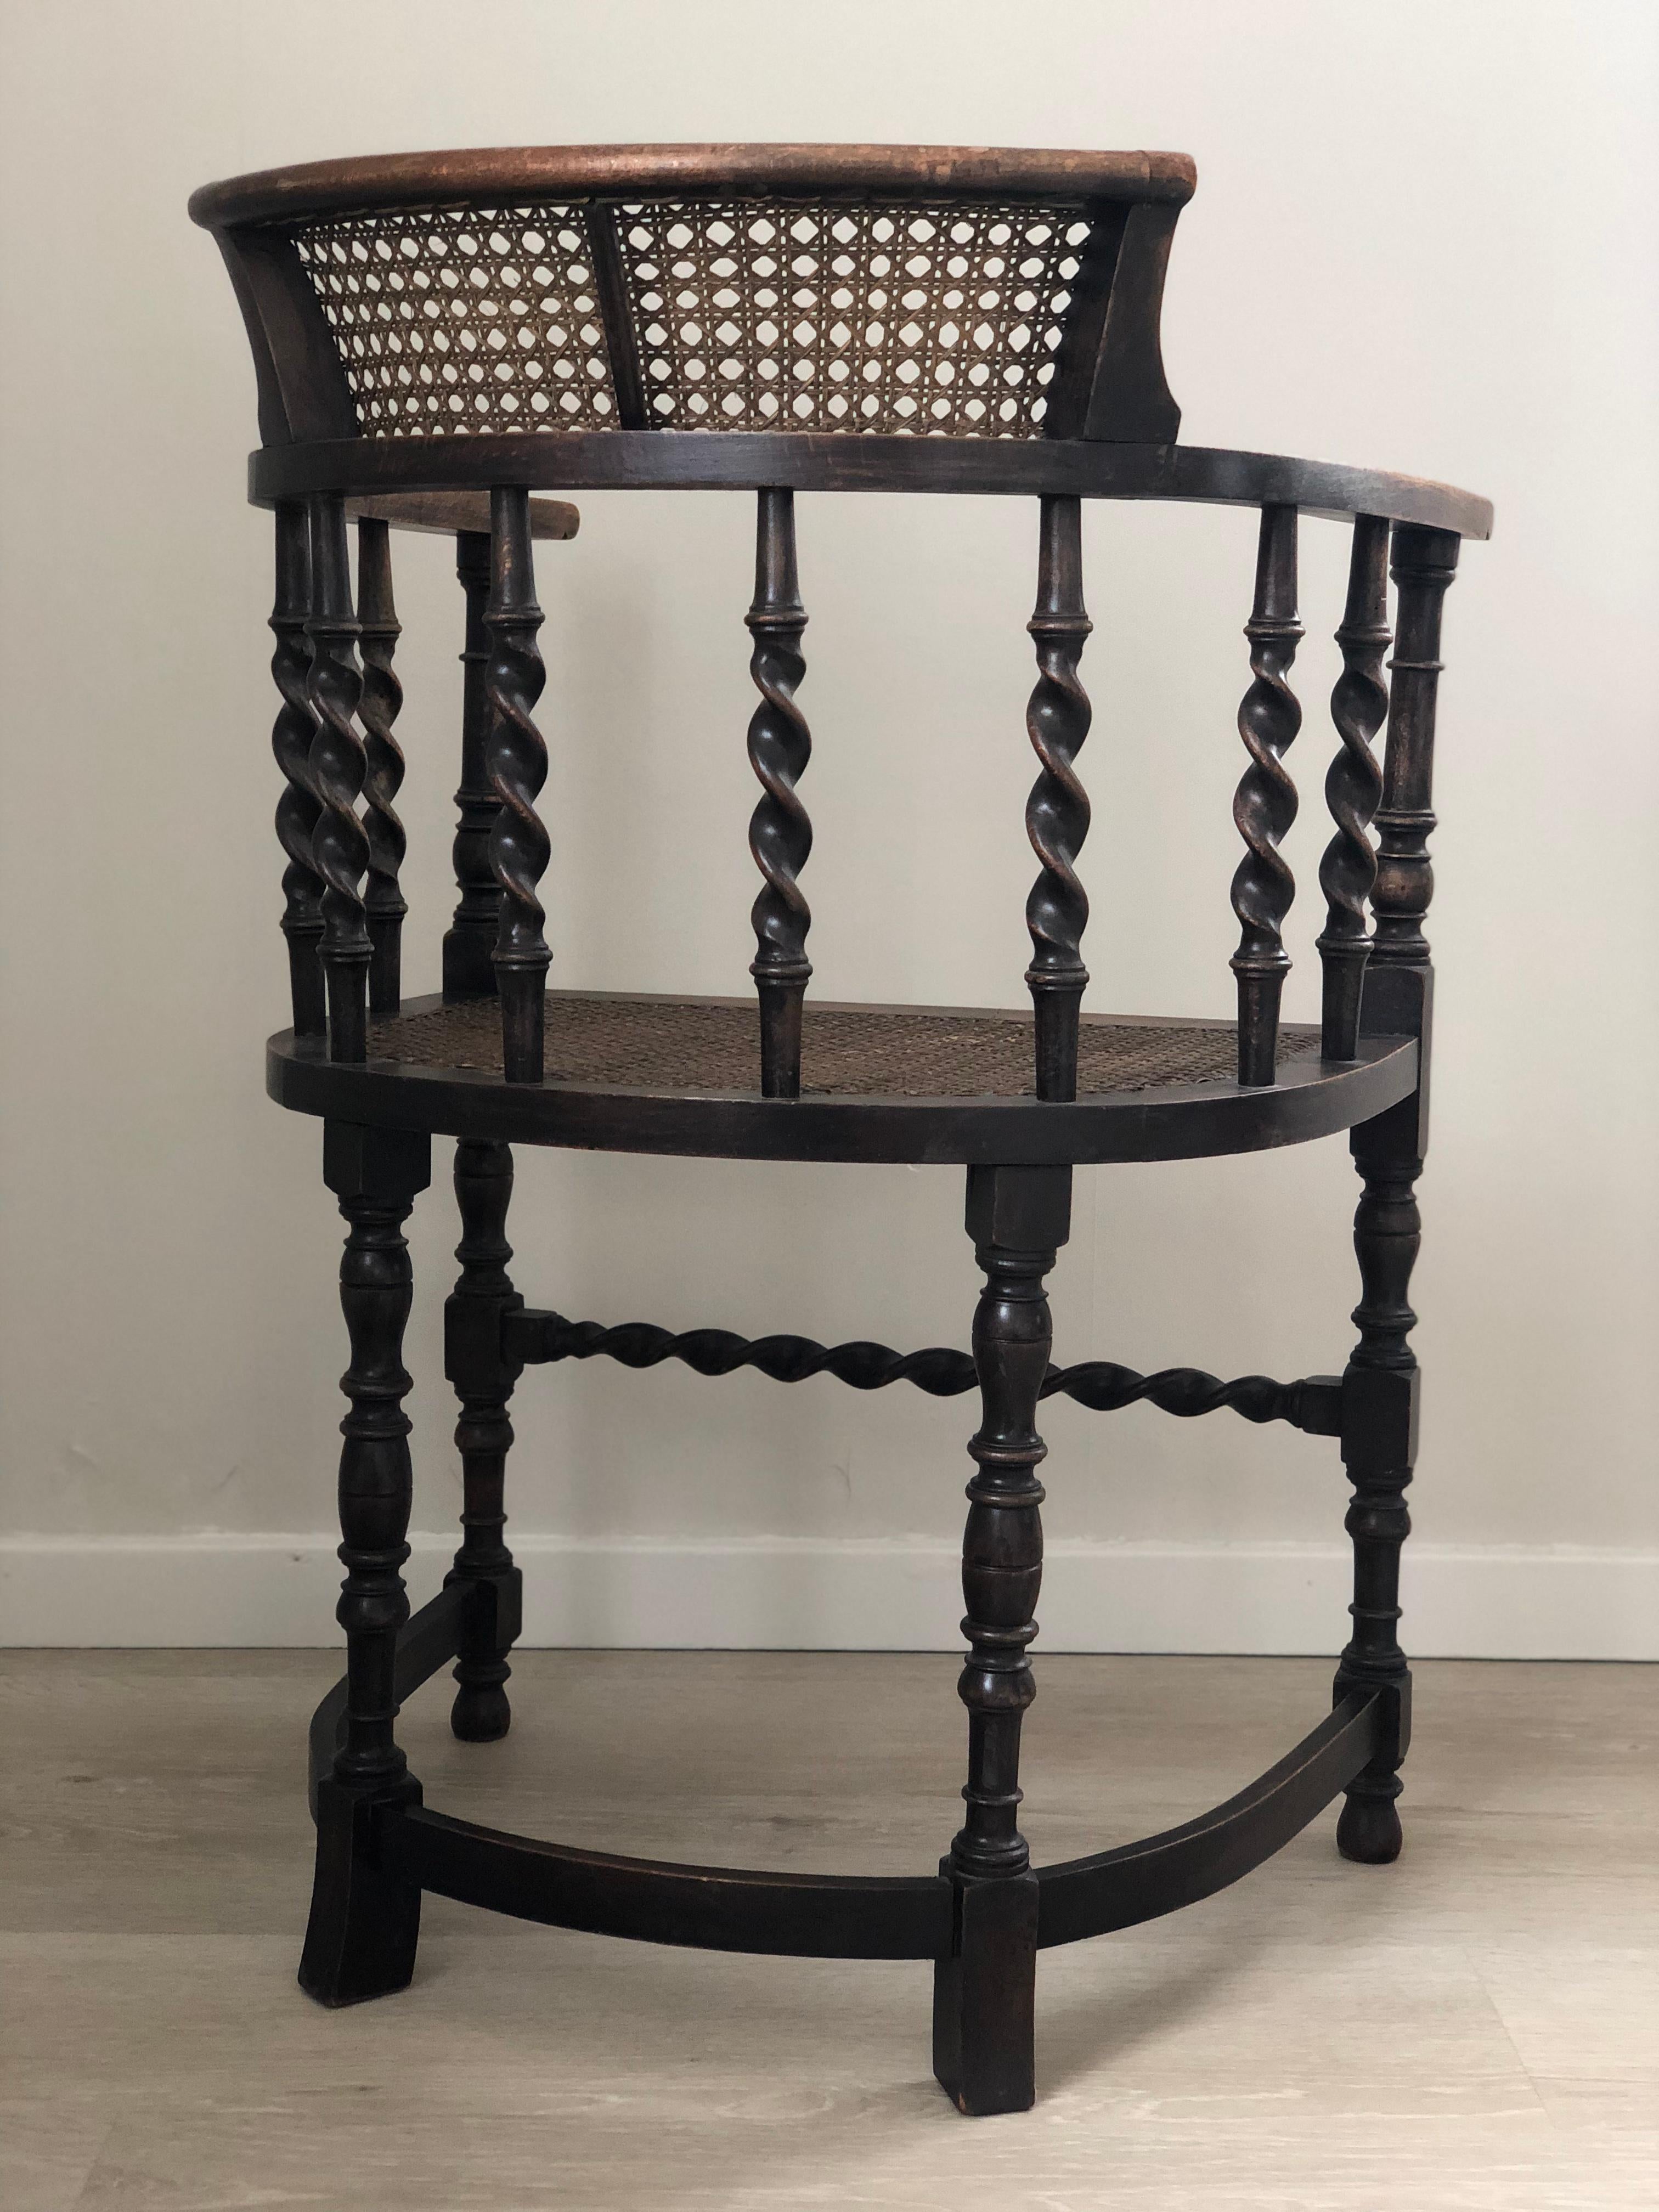 An English armchair beautifully carved with barley twist supports and bobbin turned legs from the early 20th century. Finished with a cane seat and backrest.
The beech wood chair and cane are in good condition. The cane seat is from a later period.